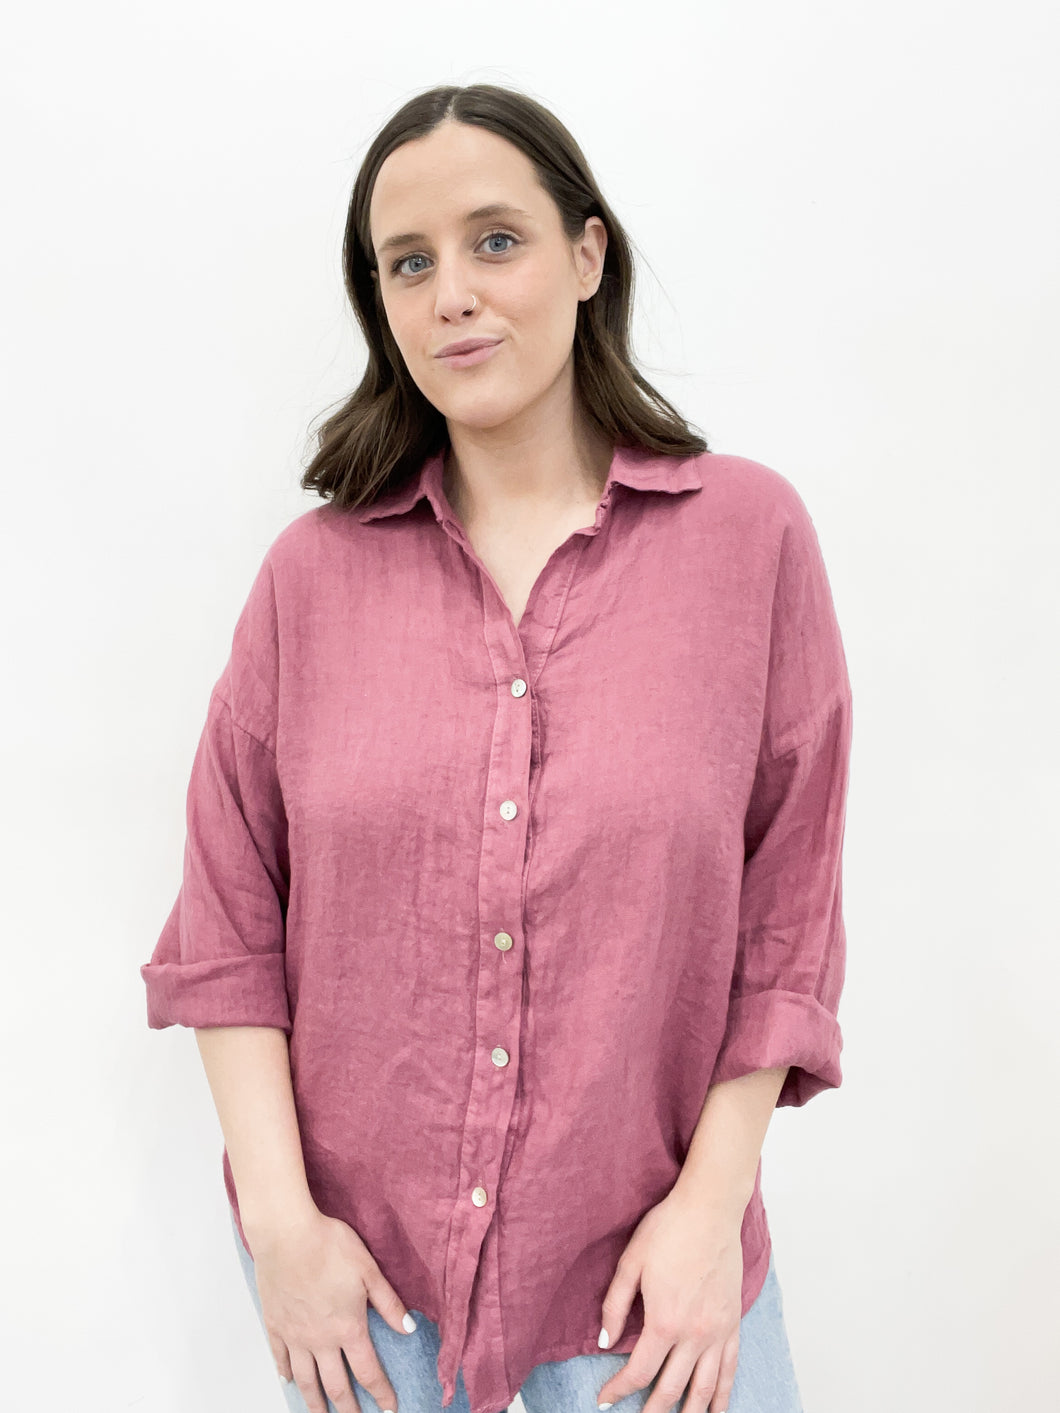 Fiji Linen Button Up Top in Berry